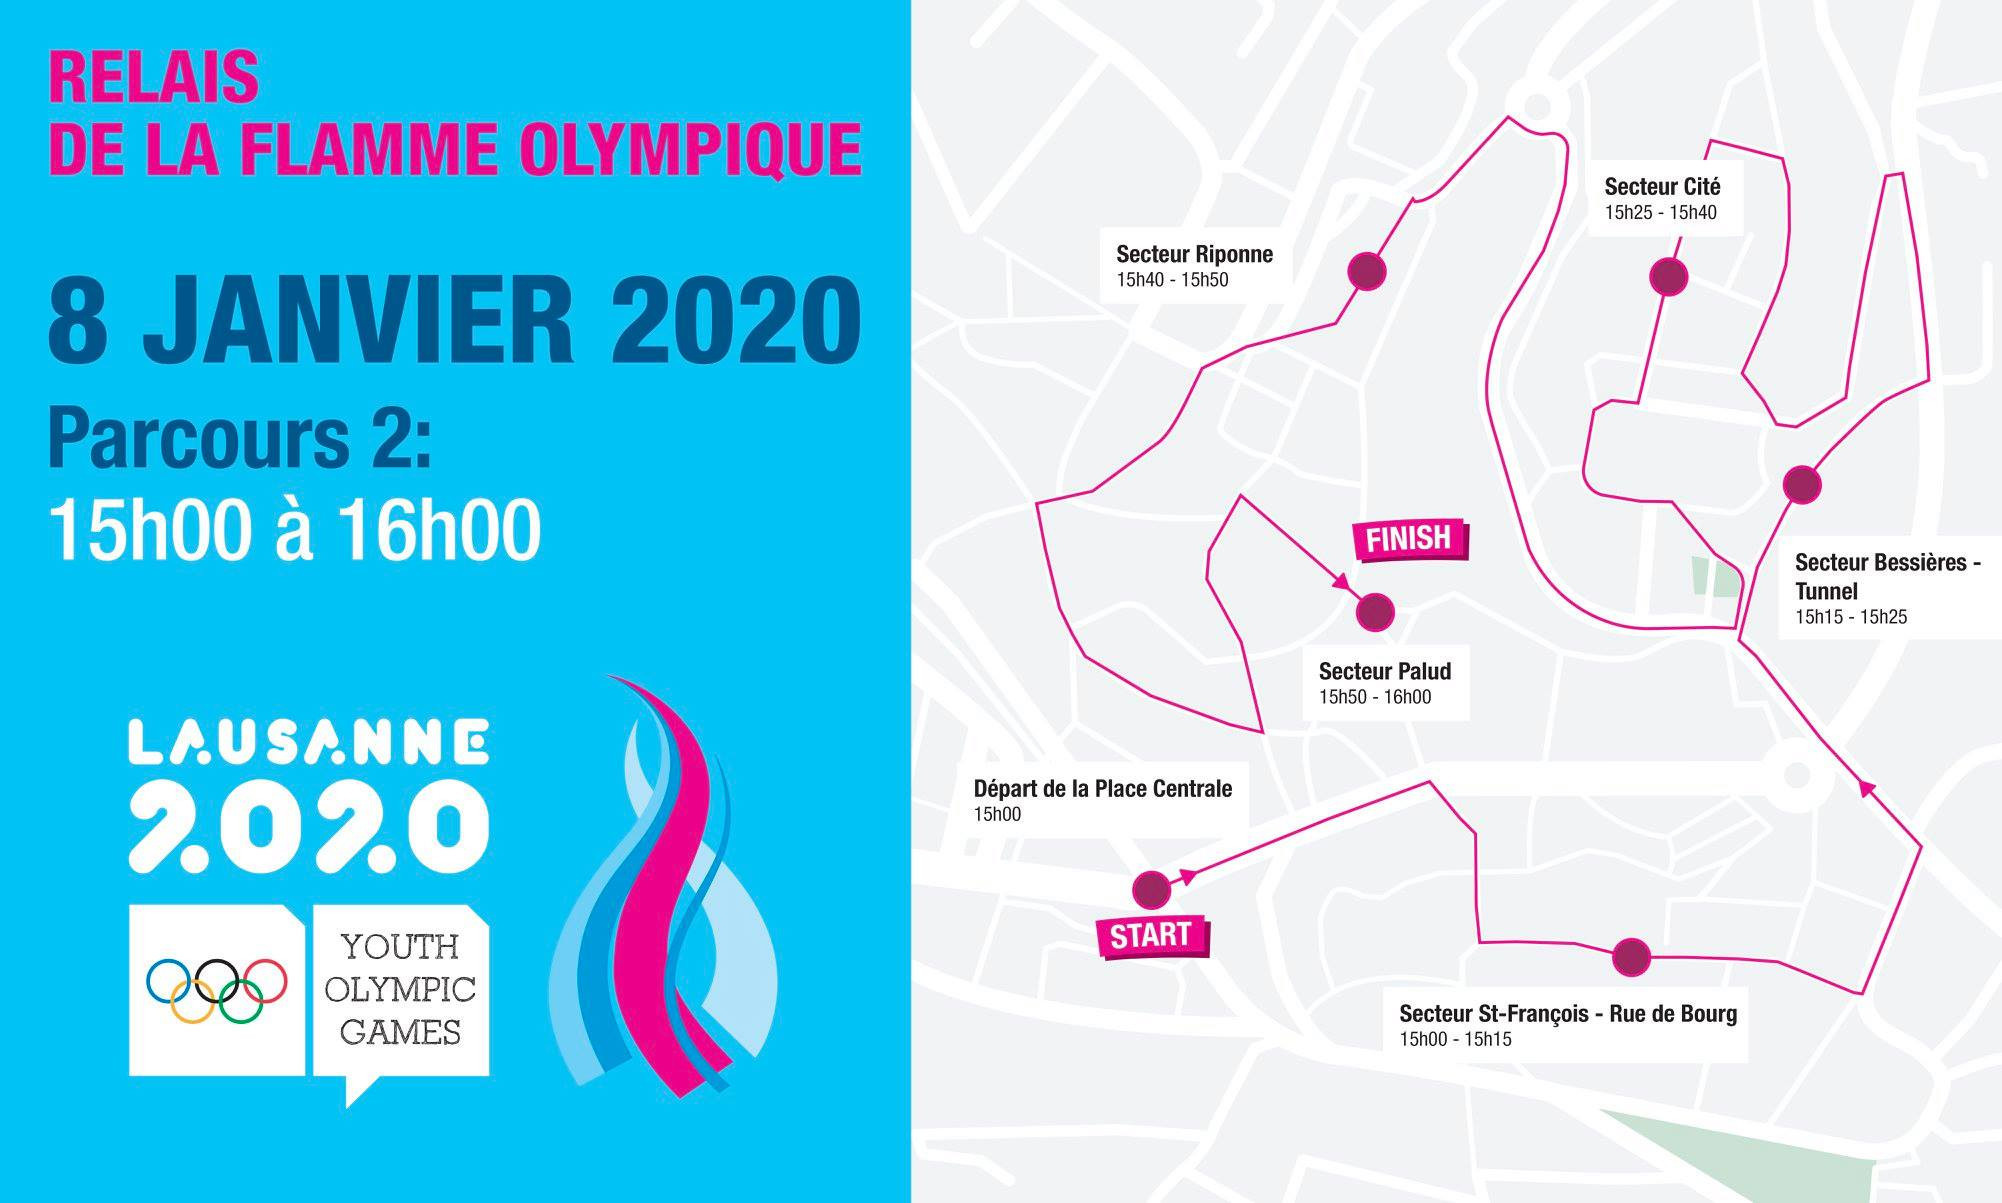 The Relay tomorrow will take place in two sections, with the second beginning at 3pm ©Lausanne 2020